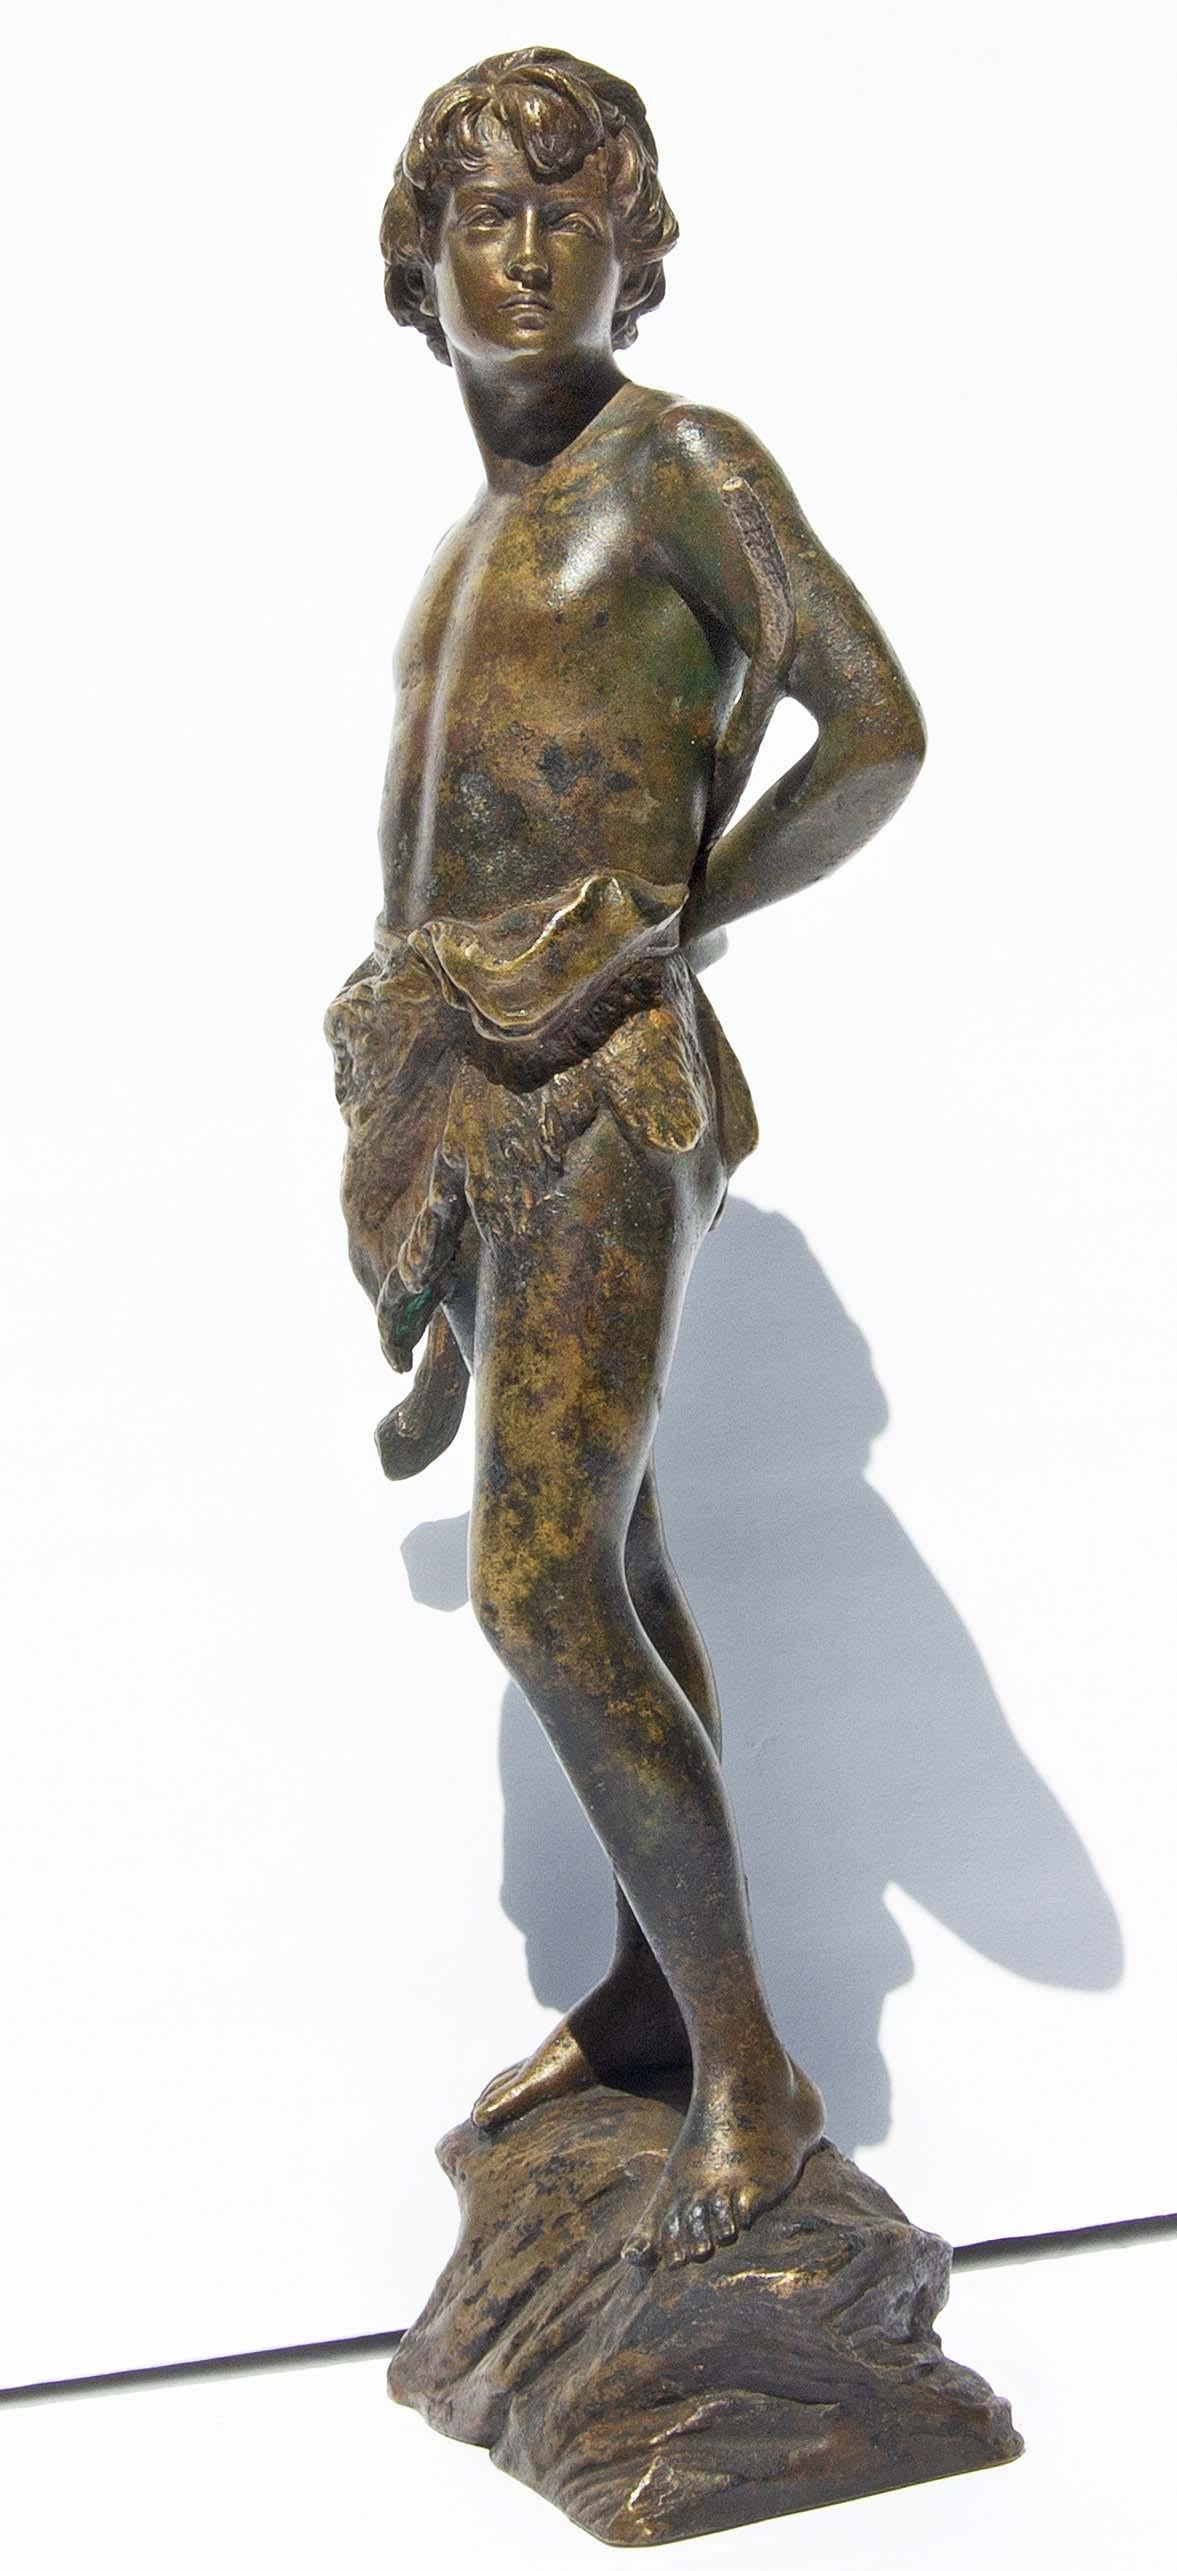 Young Goatherder Bronze Sculpture by Oscar Gladenbeck, circa 1900 - Gold Figurative Sculpture by Unknown